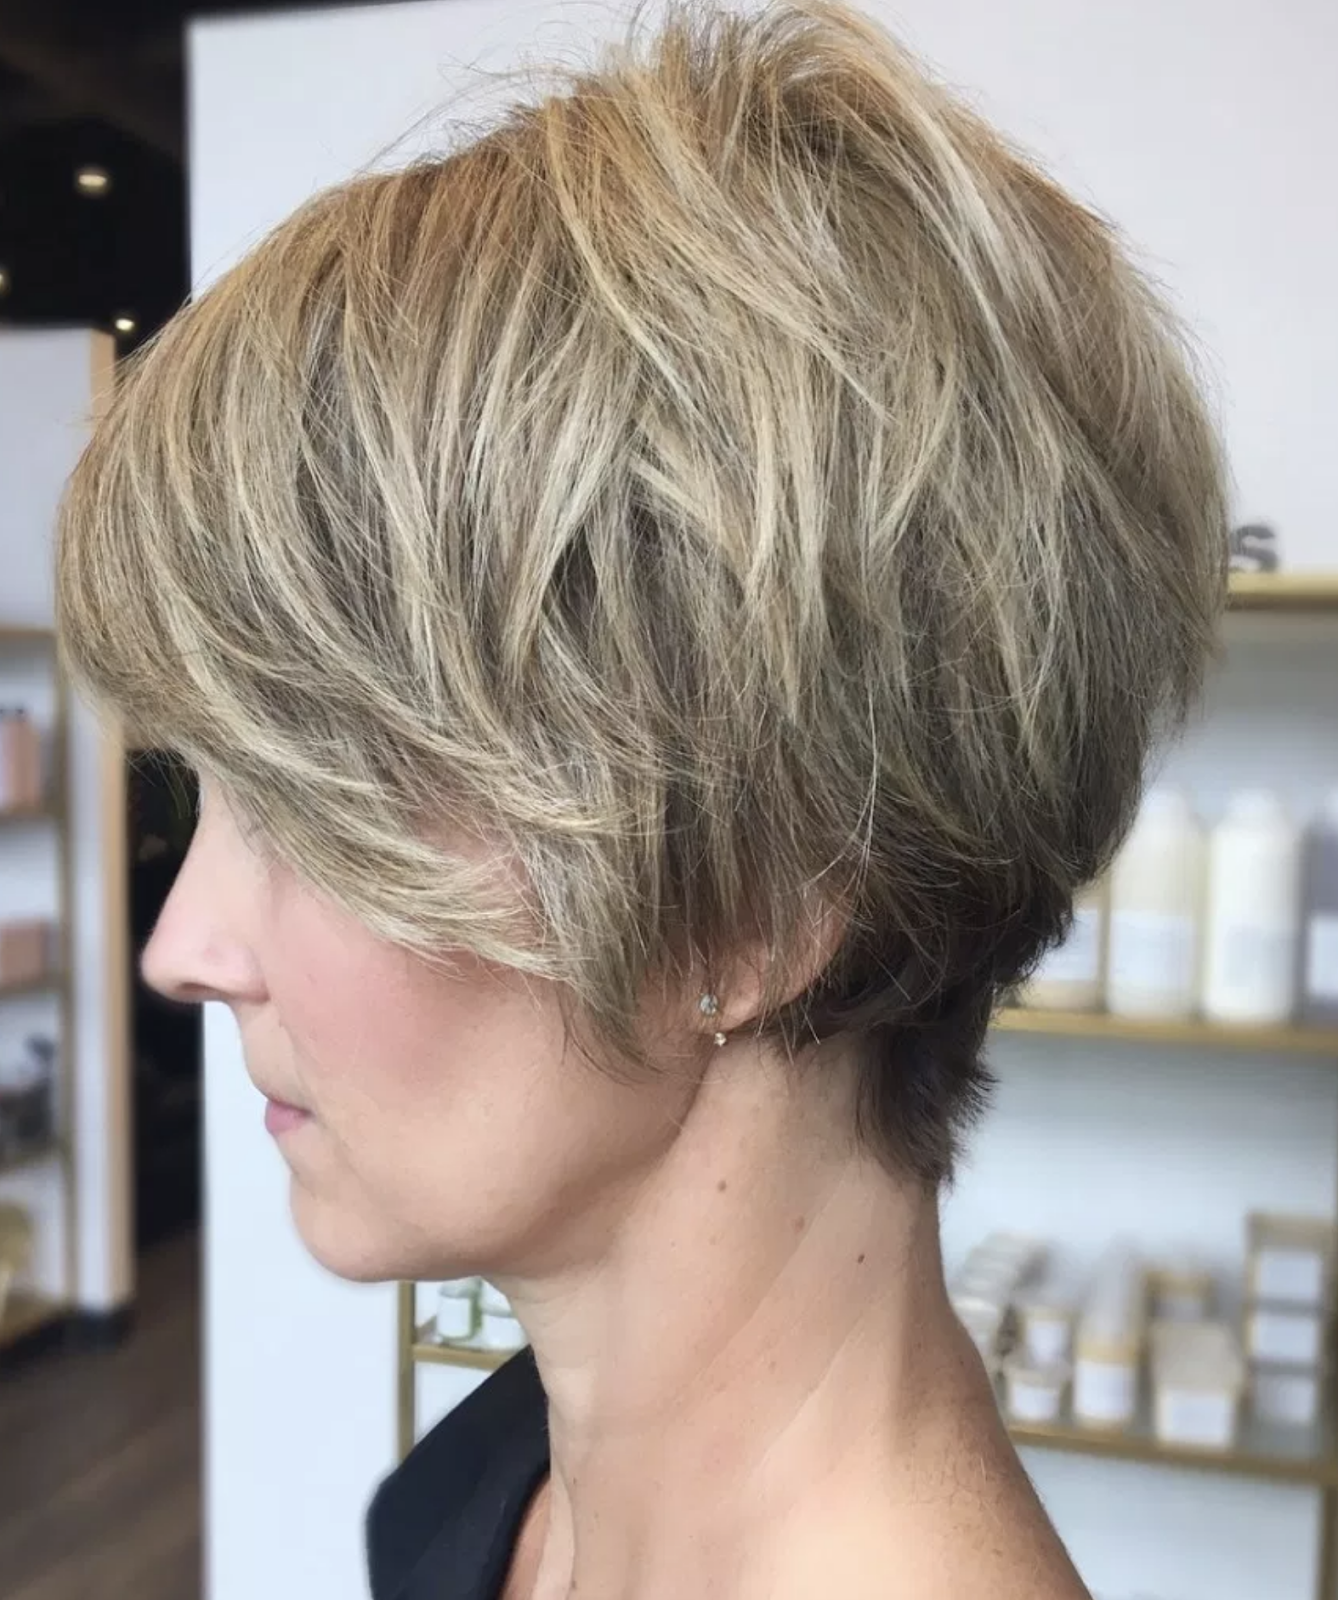 SHORT HAIRSTYLES FOR OVER 40 YEAR OLD WOMAN - LatestHairstylePedia.com